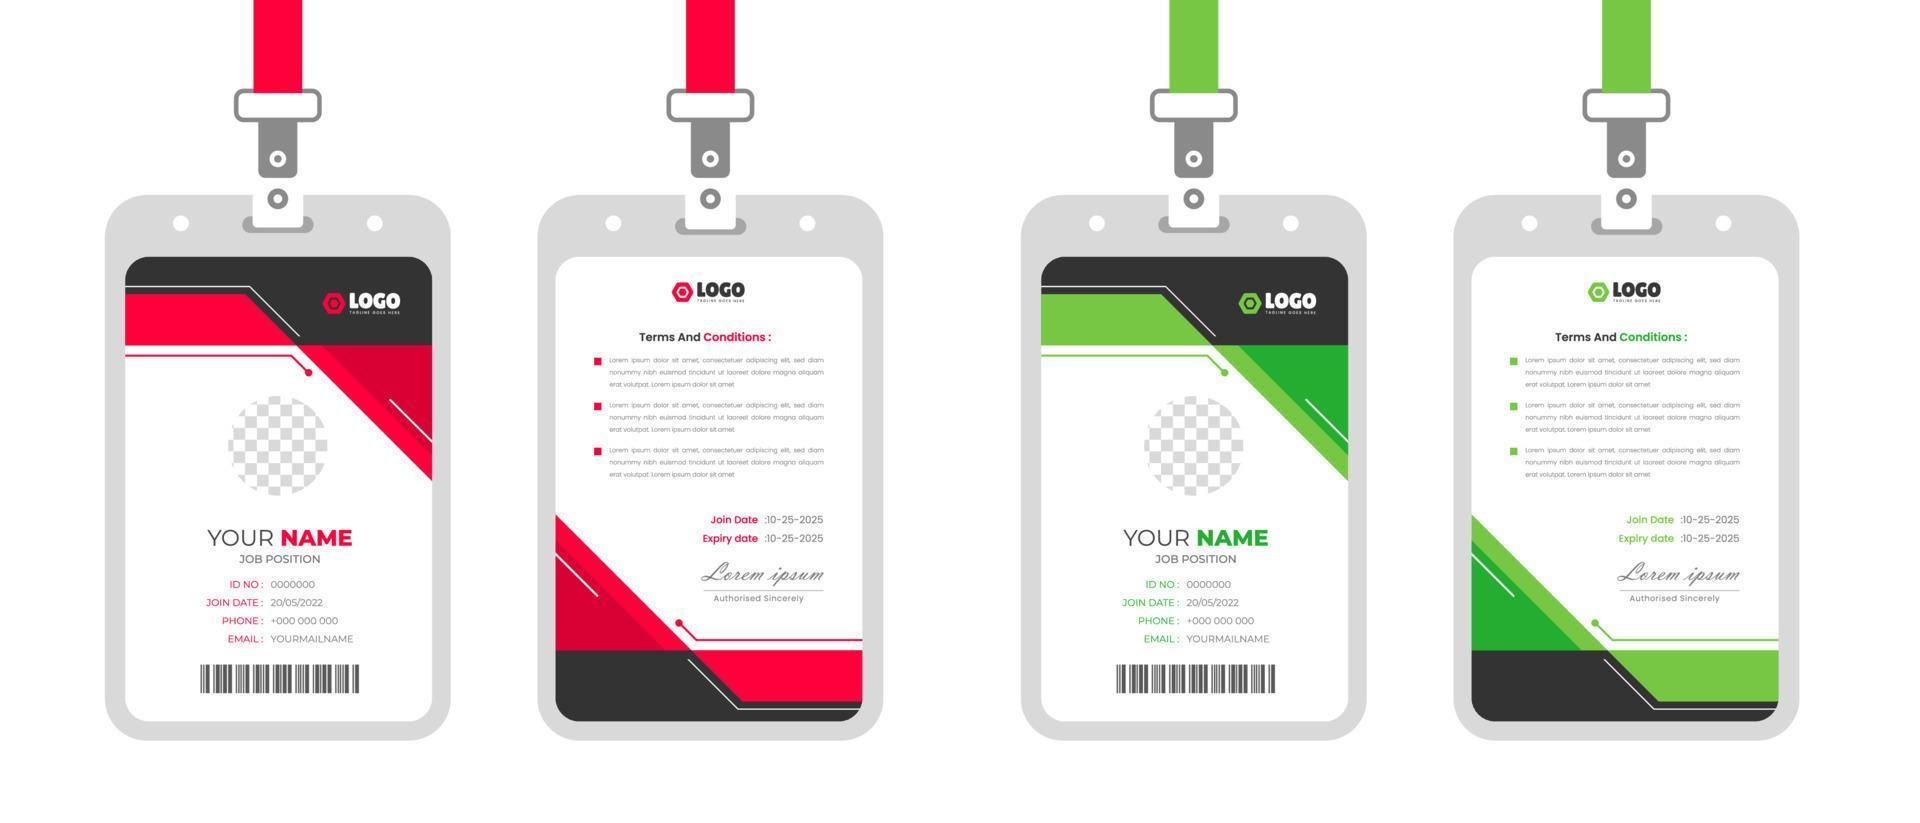 corporate Modern and simple business office id card design bundle. Corporate company employee identity card template with red and green color. vector